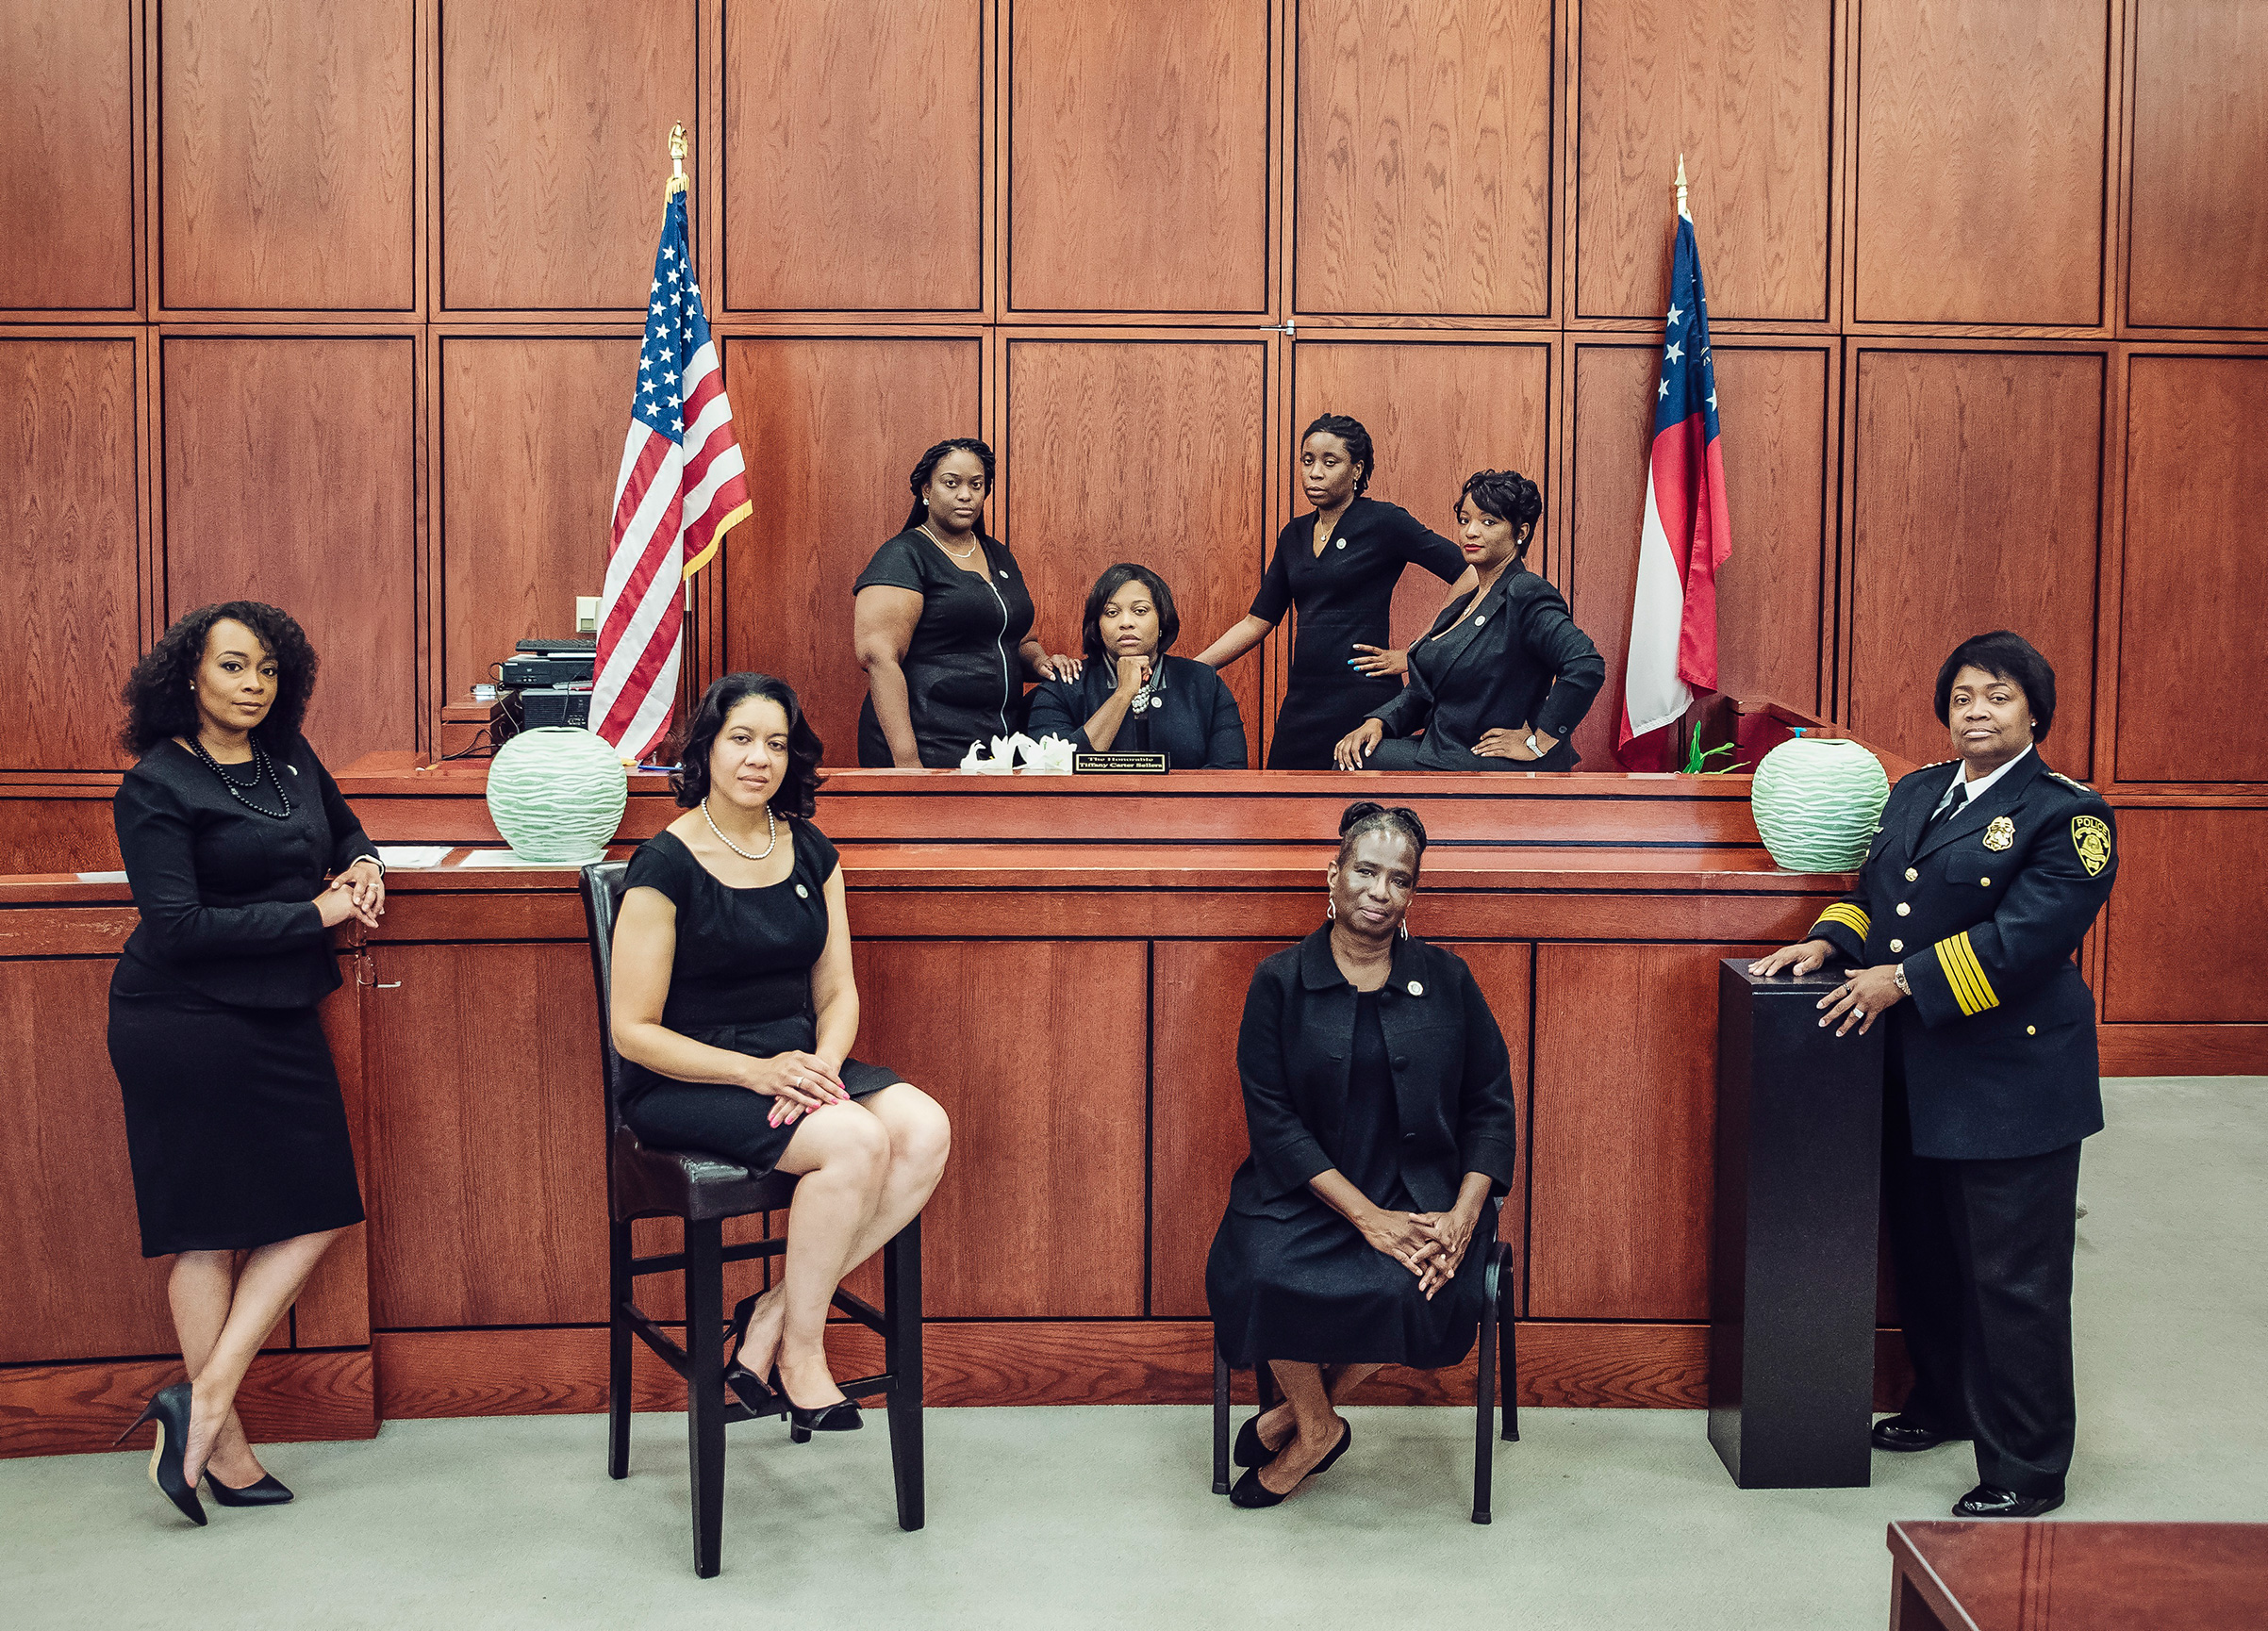 This photo of one city’s justice-system leaders appeared in the Atlanta Voice and then went viral (Reginald Duncan—Cranium LLC)